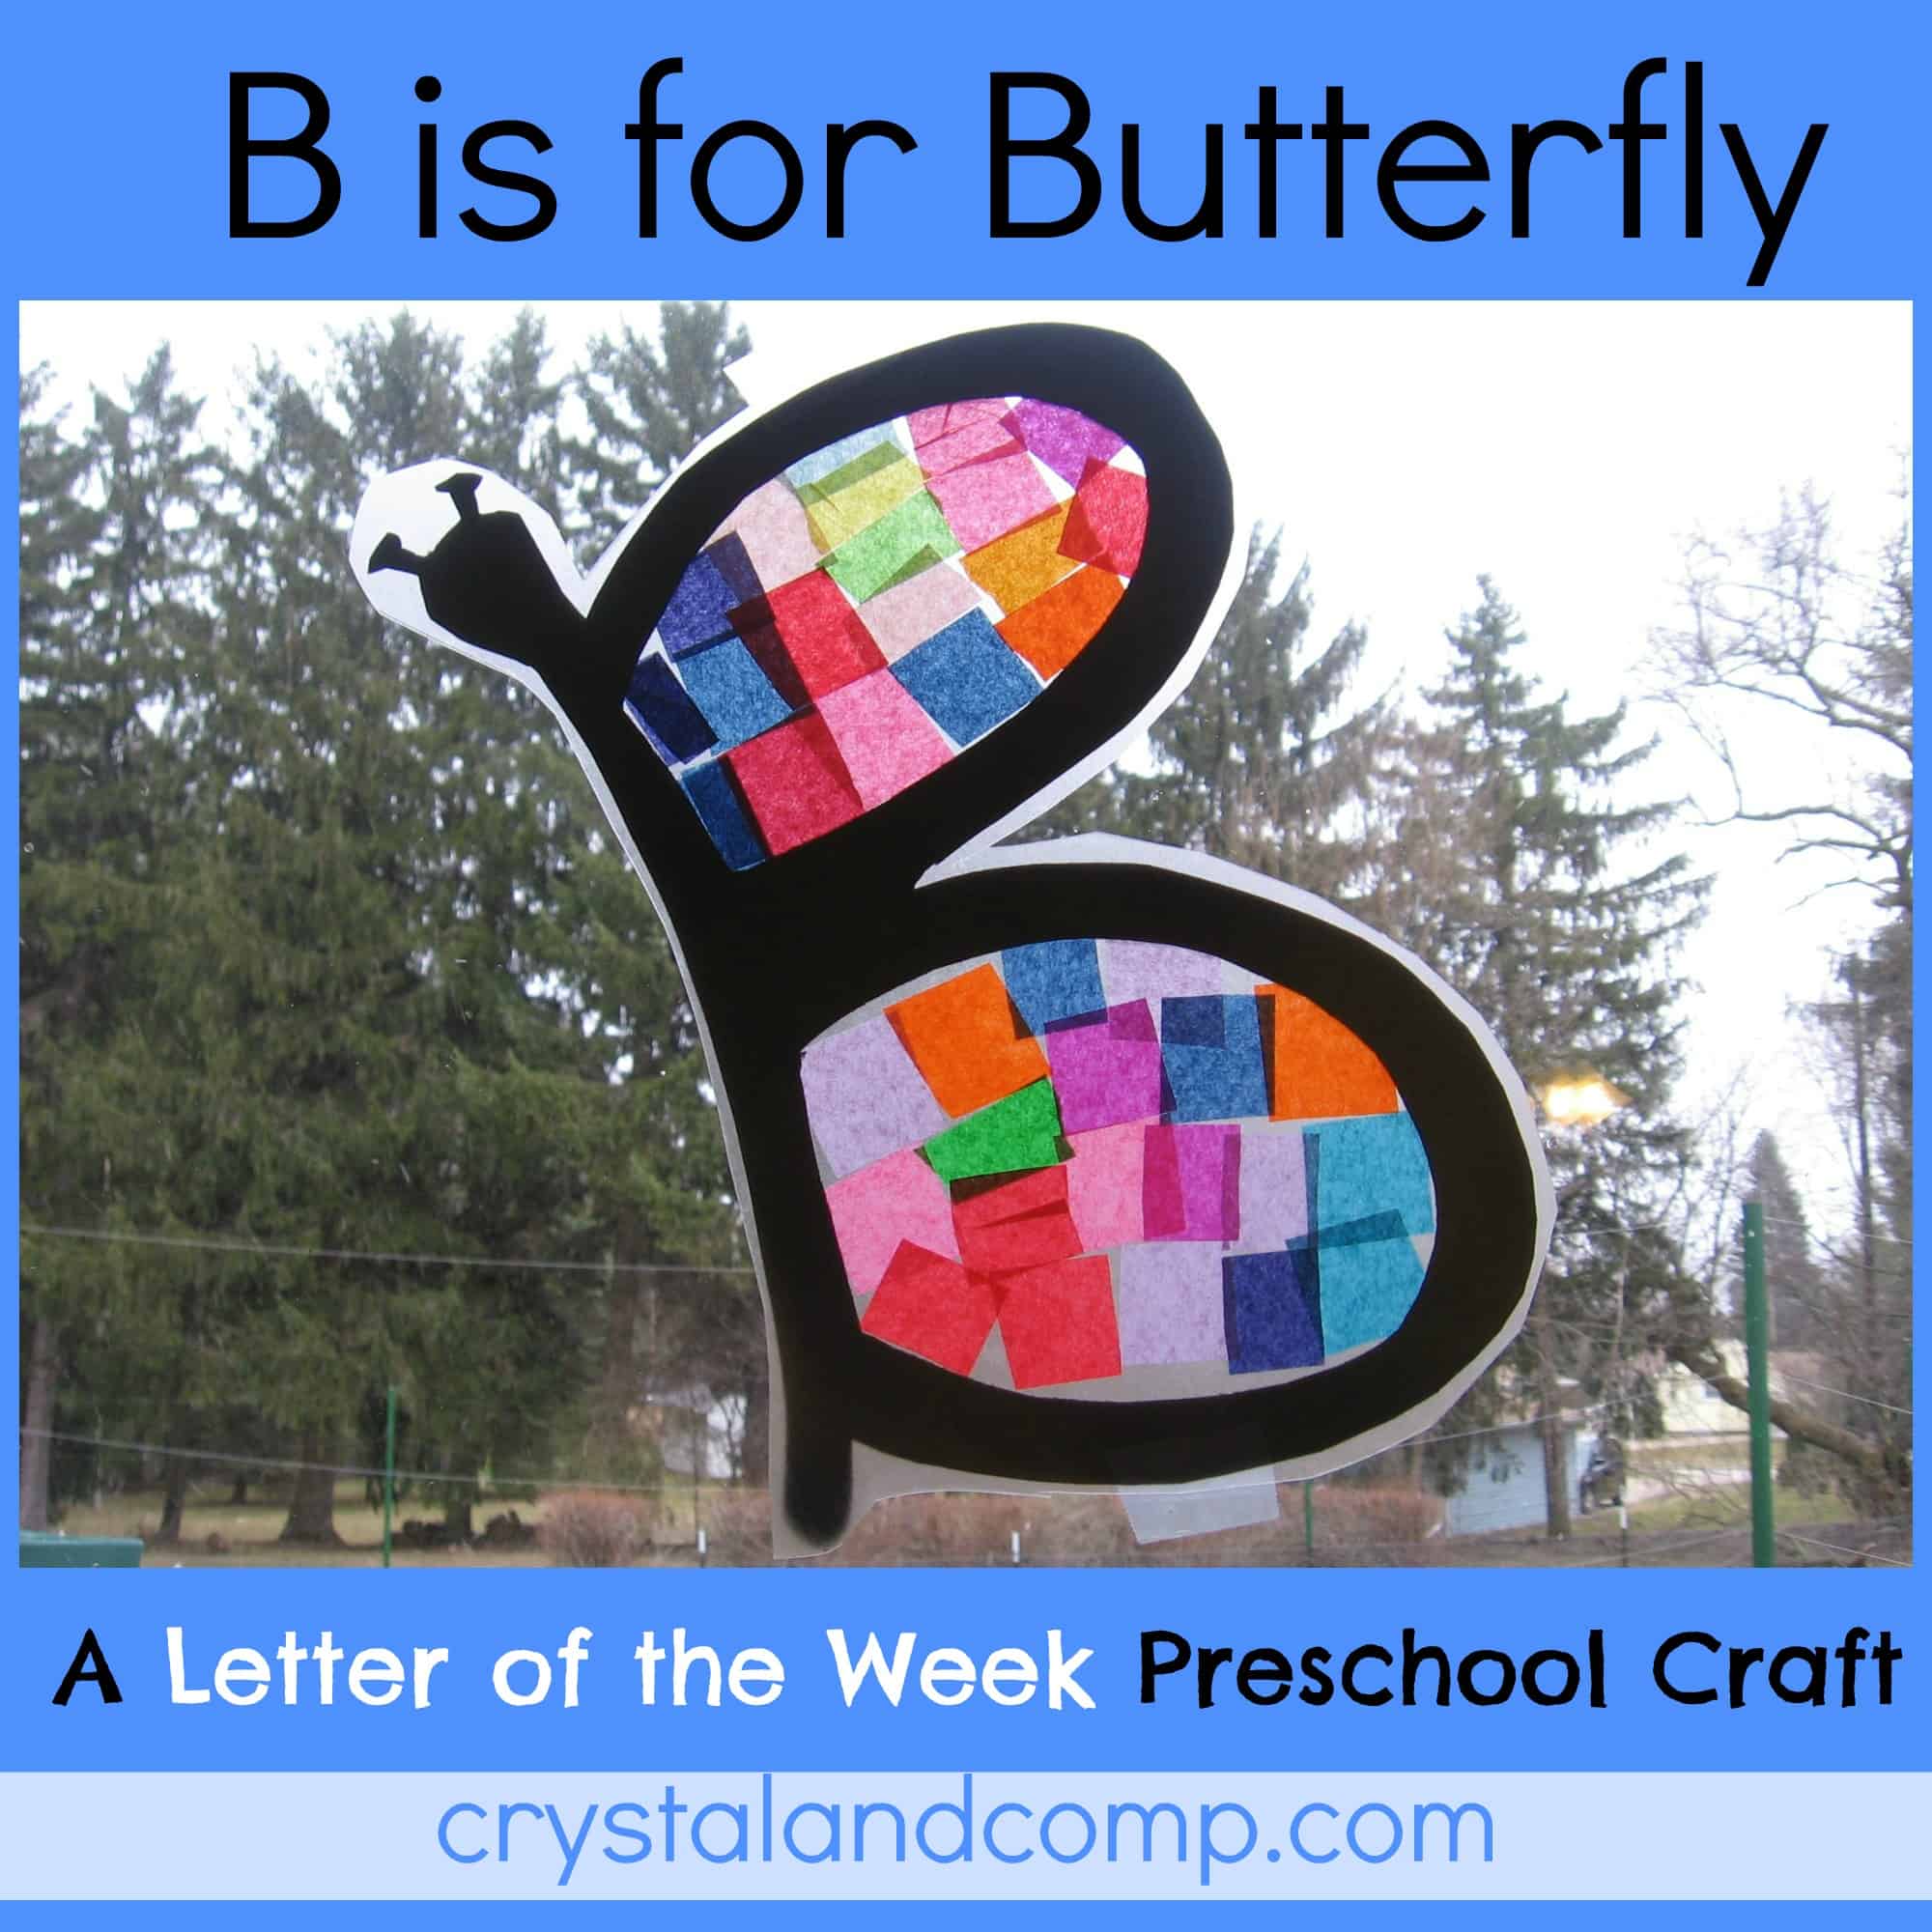 B-is-for-butterfly-preschool-craft-1-crystalandcomp Letter B Crafts for Preschoolers